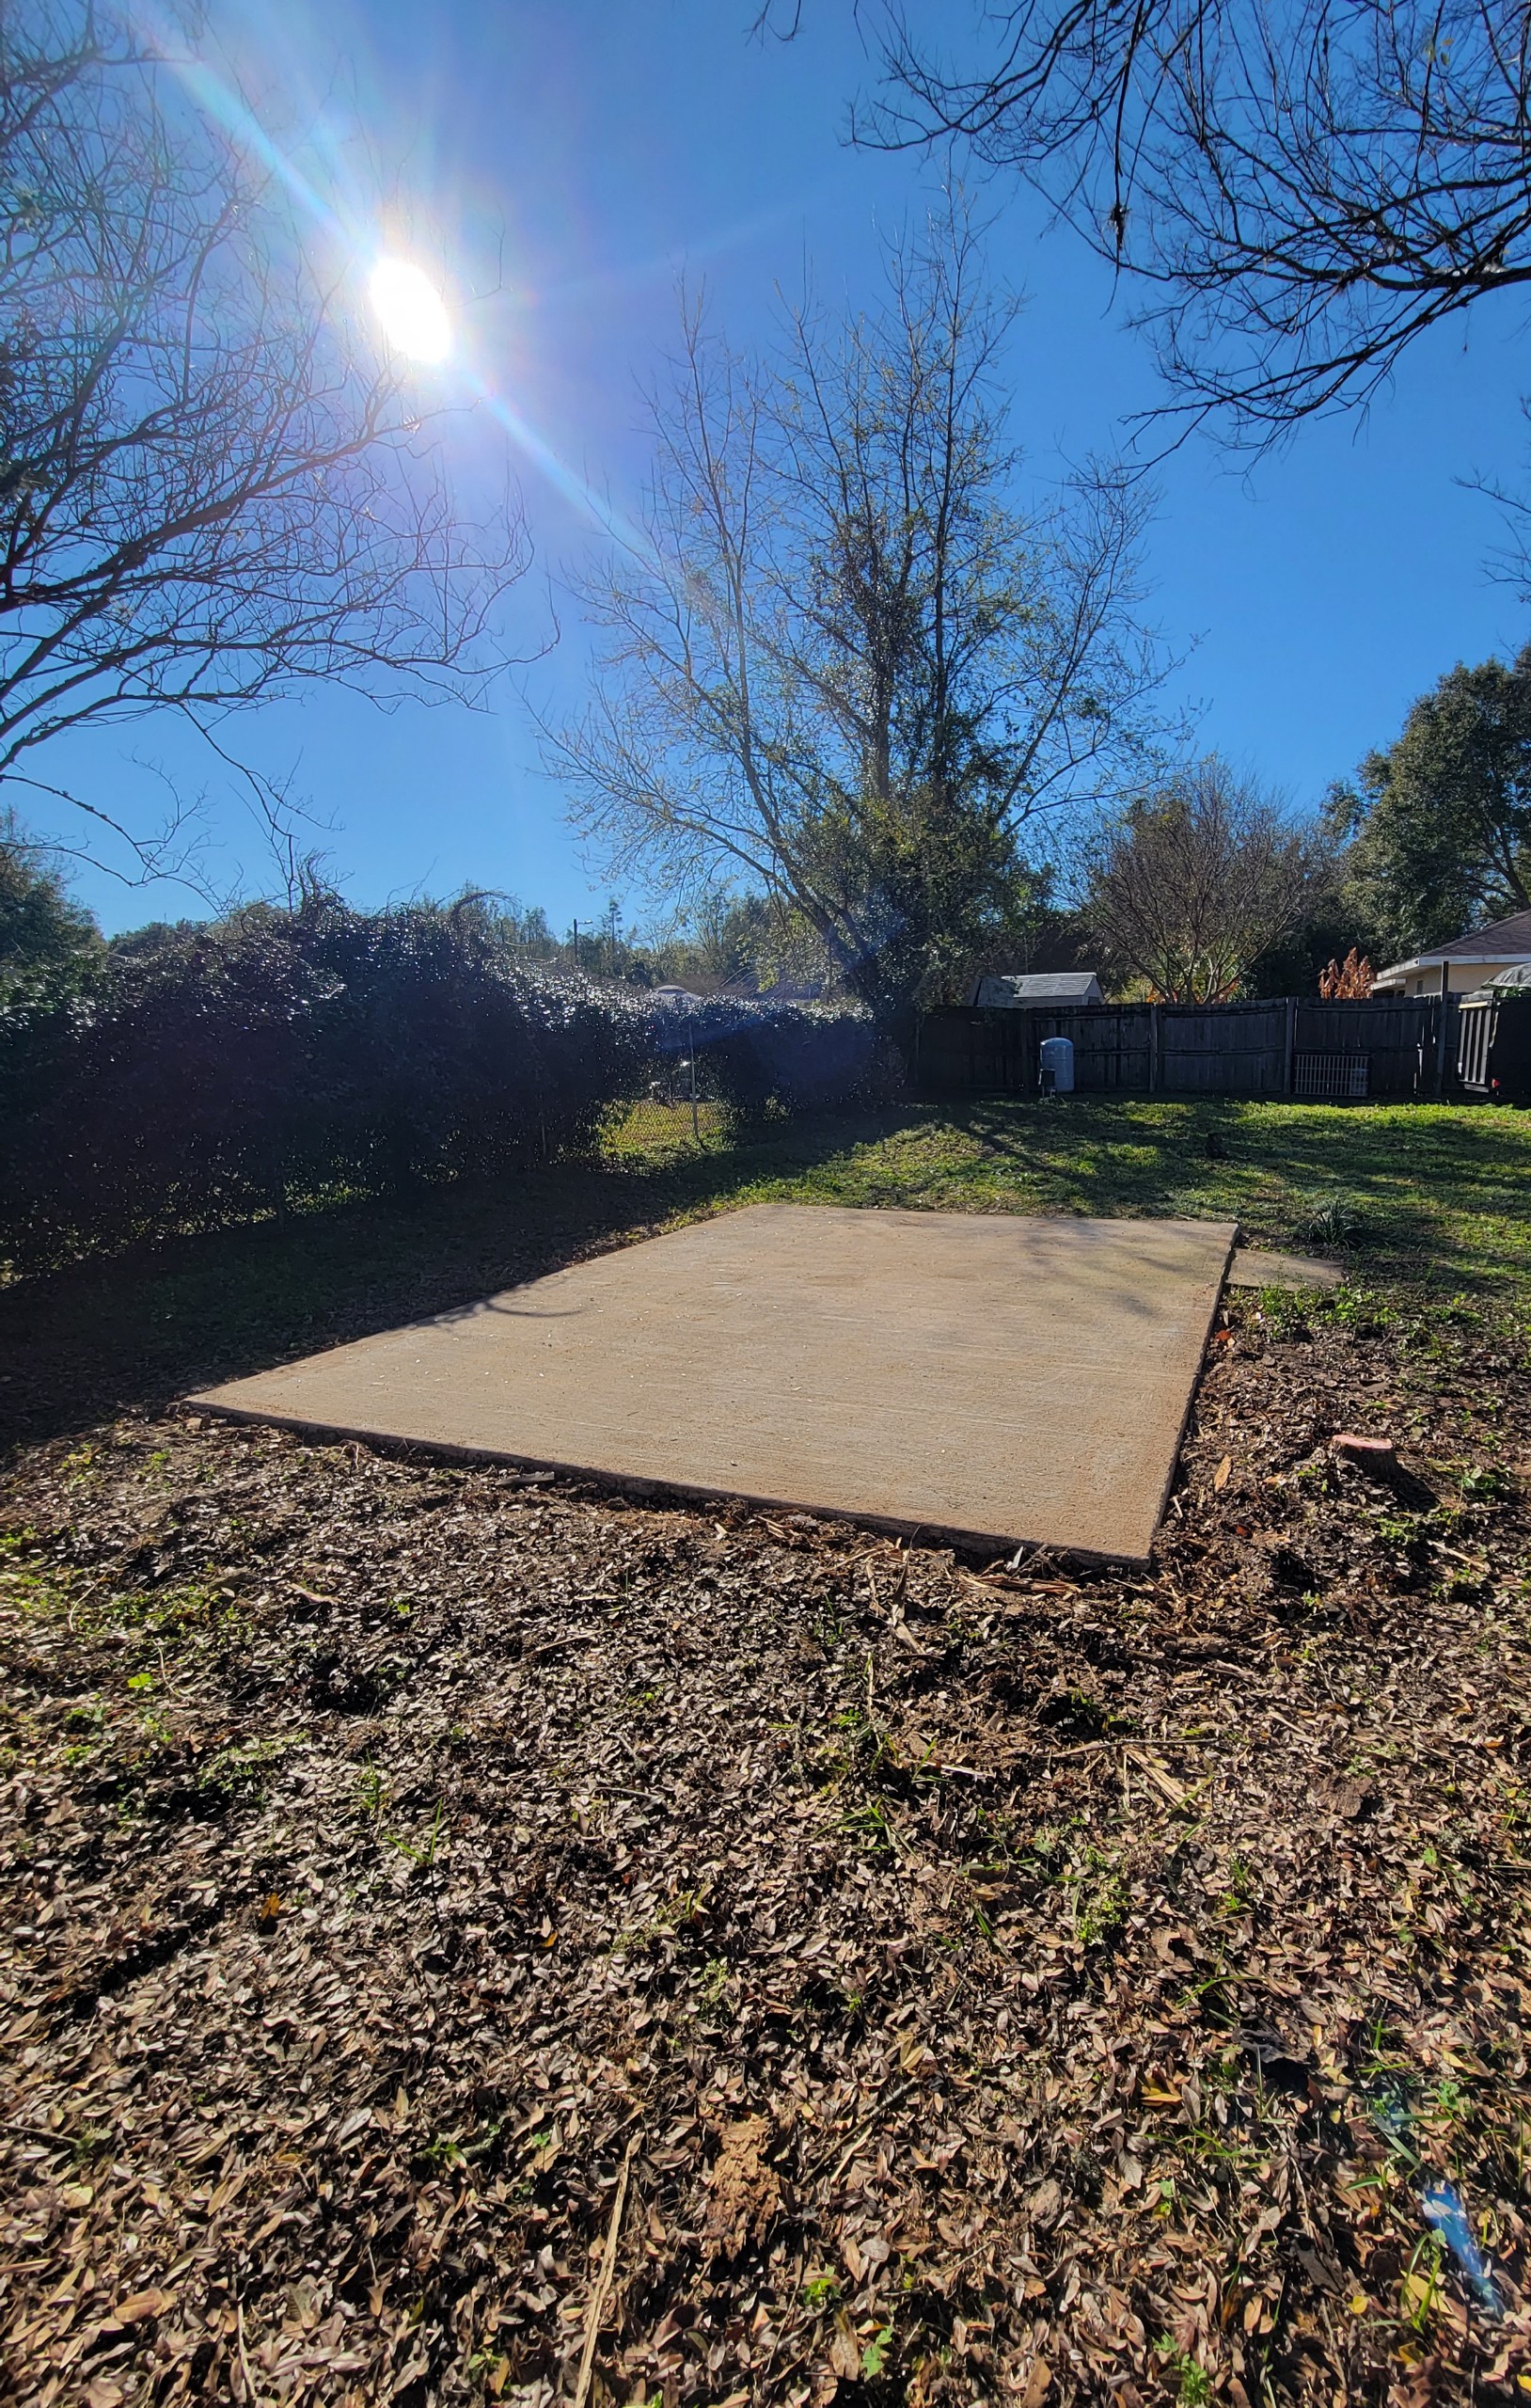 Shed completely removed and area clean.